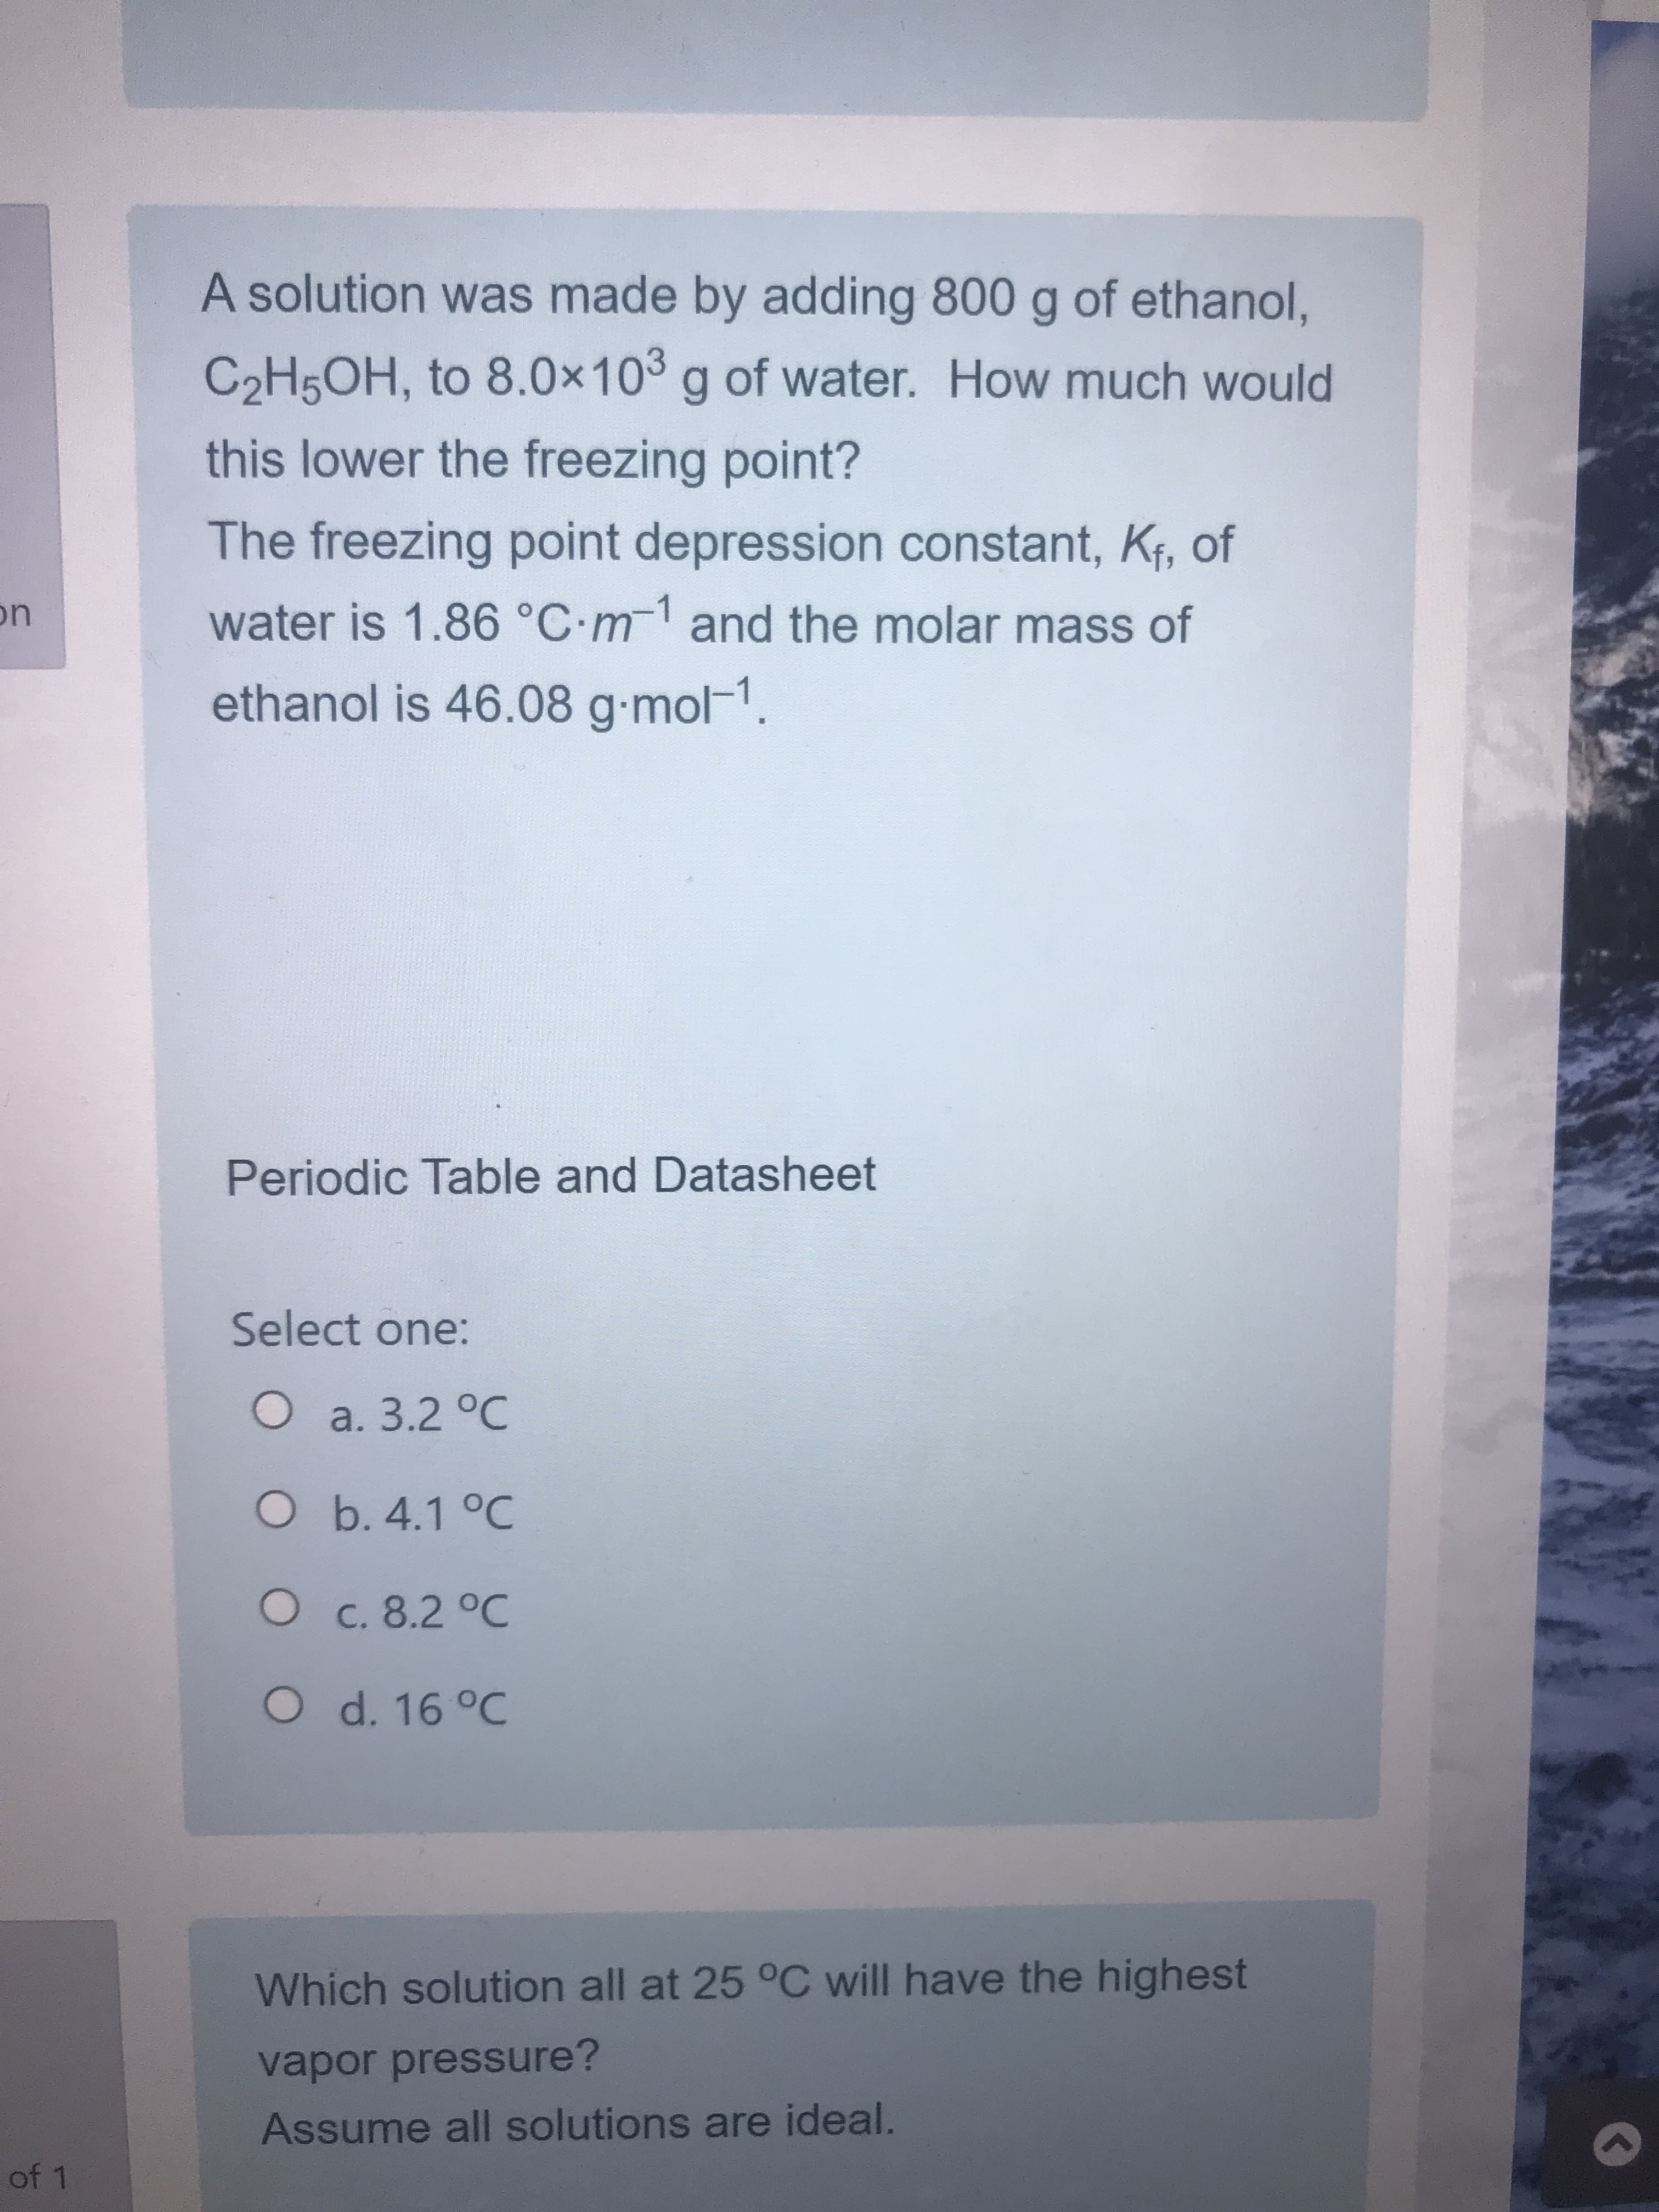 A solution was made by adding 800 g of ethanol,
C2H5OH, to 8.0x10 g of water. How much would
this lower the freezing point?
The freezing point depression constant, Kf, of
water is 1.86 °C-m-1 and the molar mass of
ethanol is 46.08 g-mol-1.
